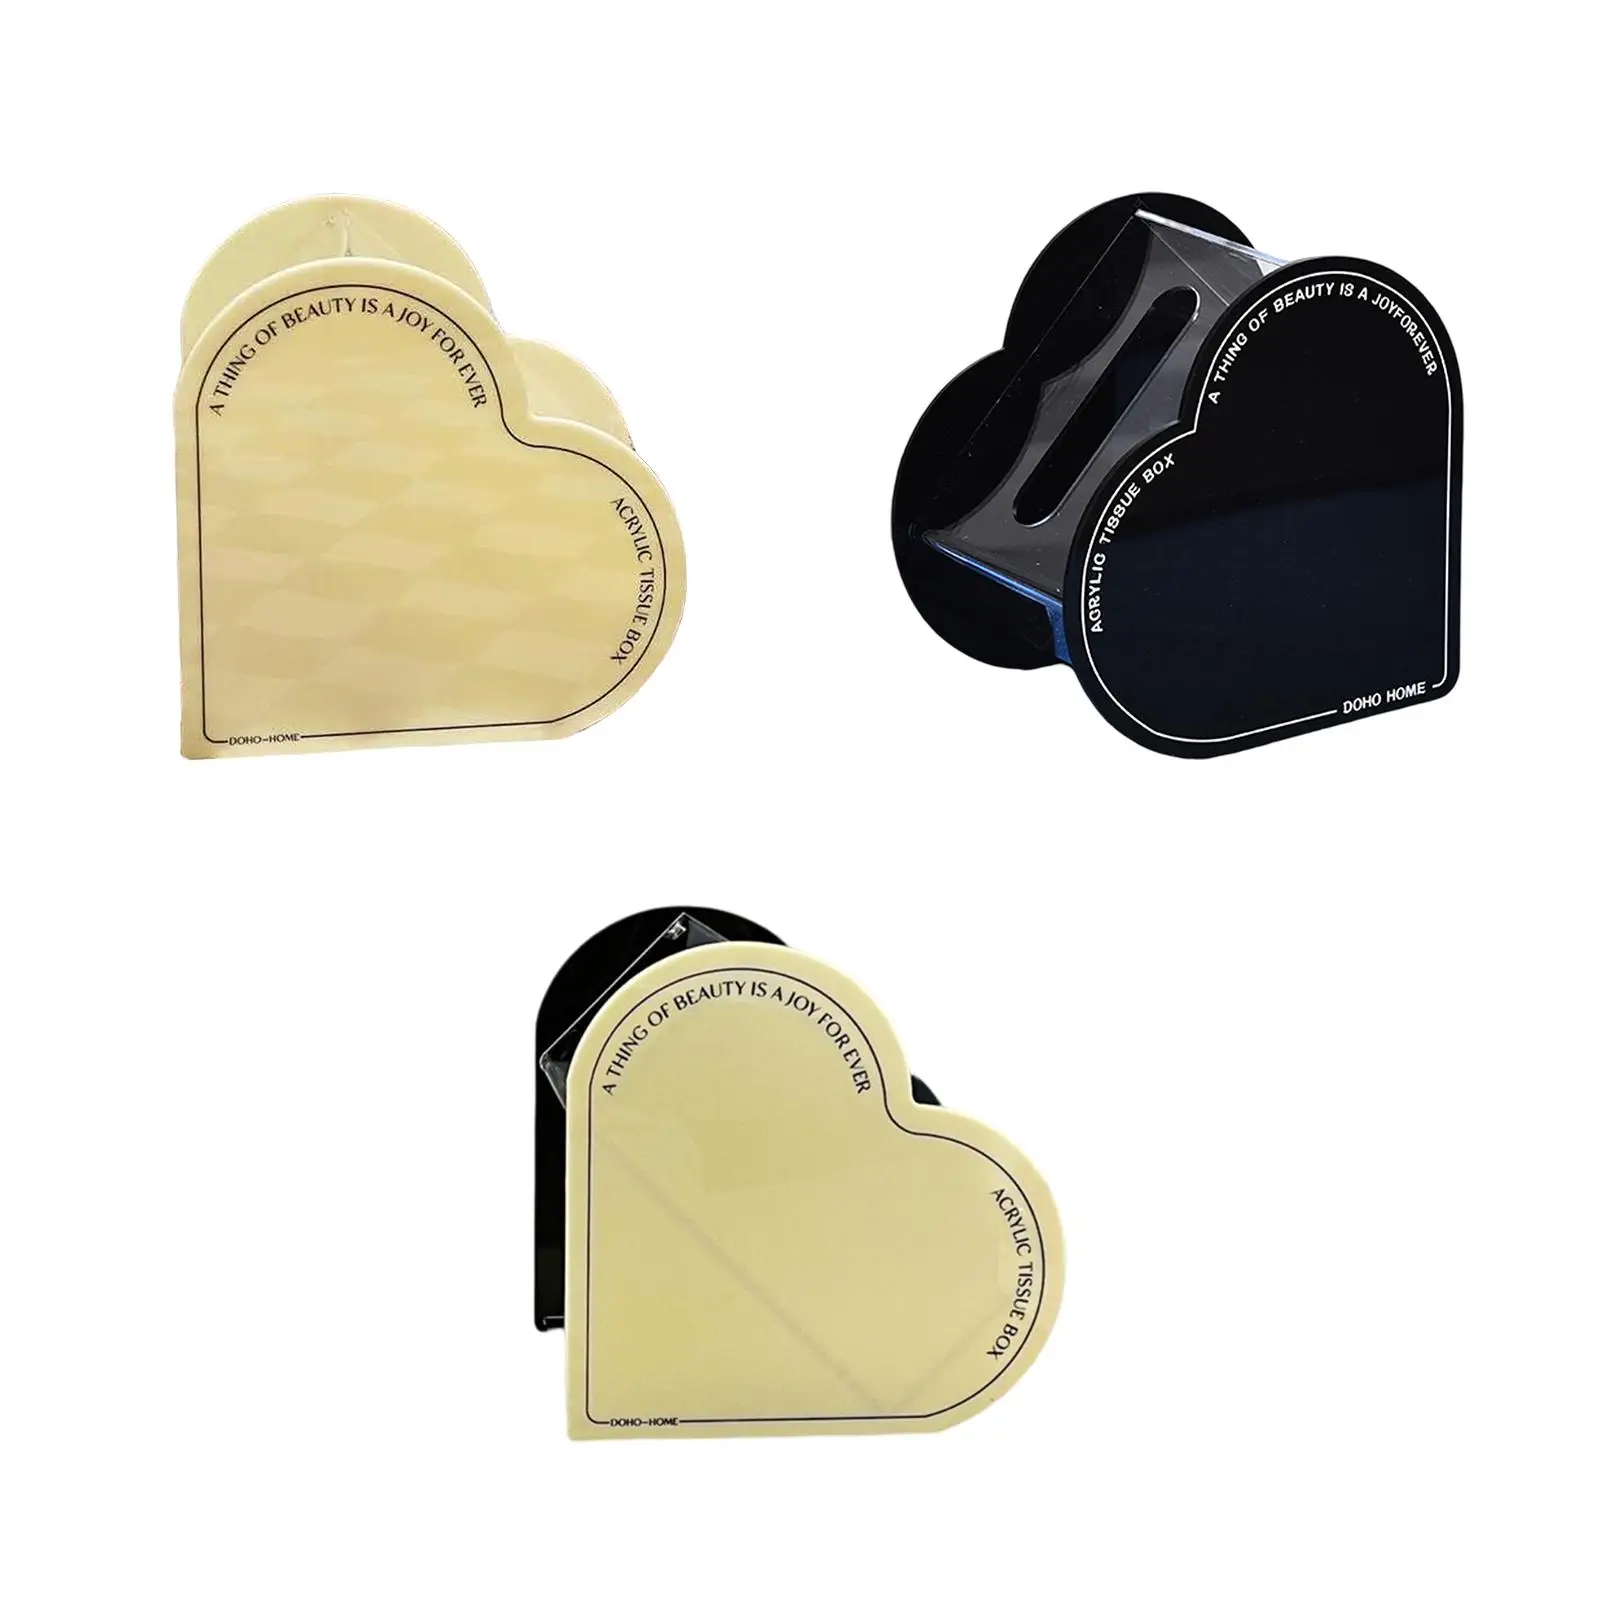 Heart Shaped Tissue Box Cover Household Storage Container Toilet Paper Storage Holder Bathroom Tissue Holders for Decor Bathroom